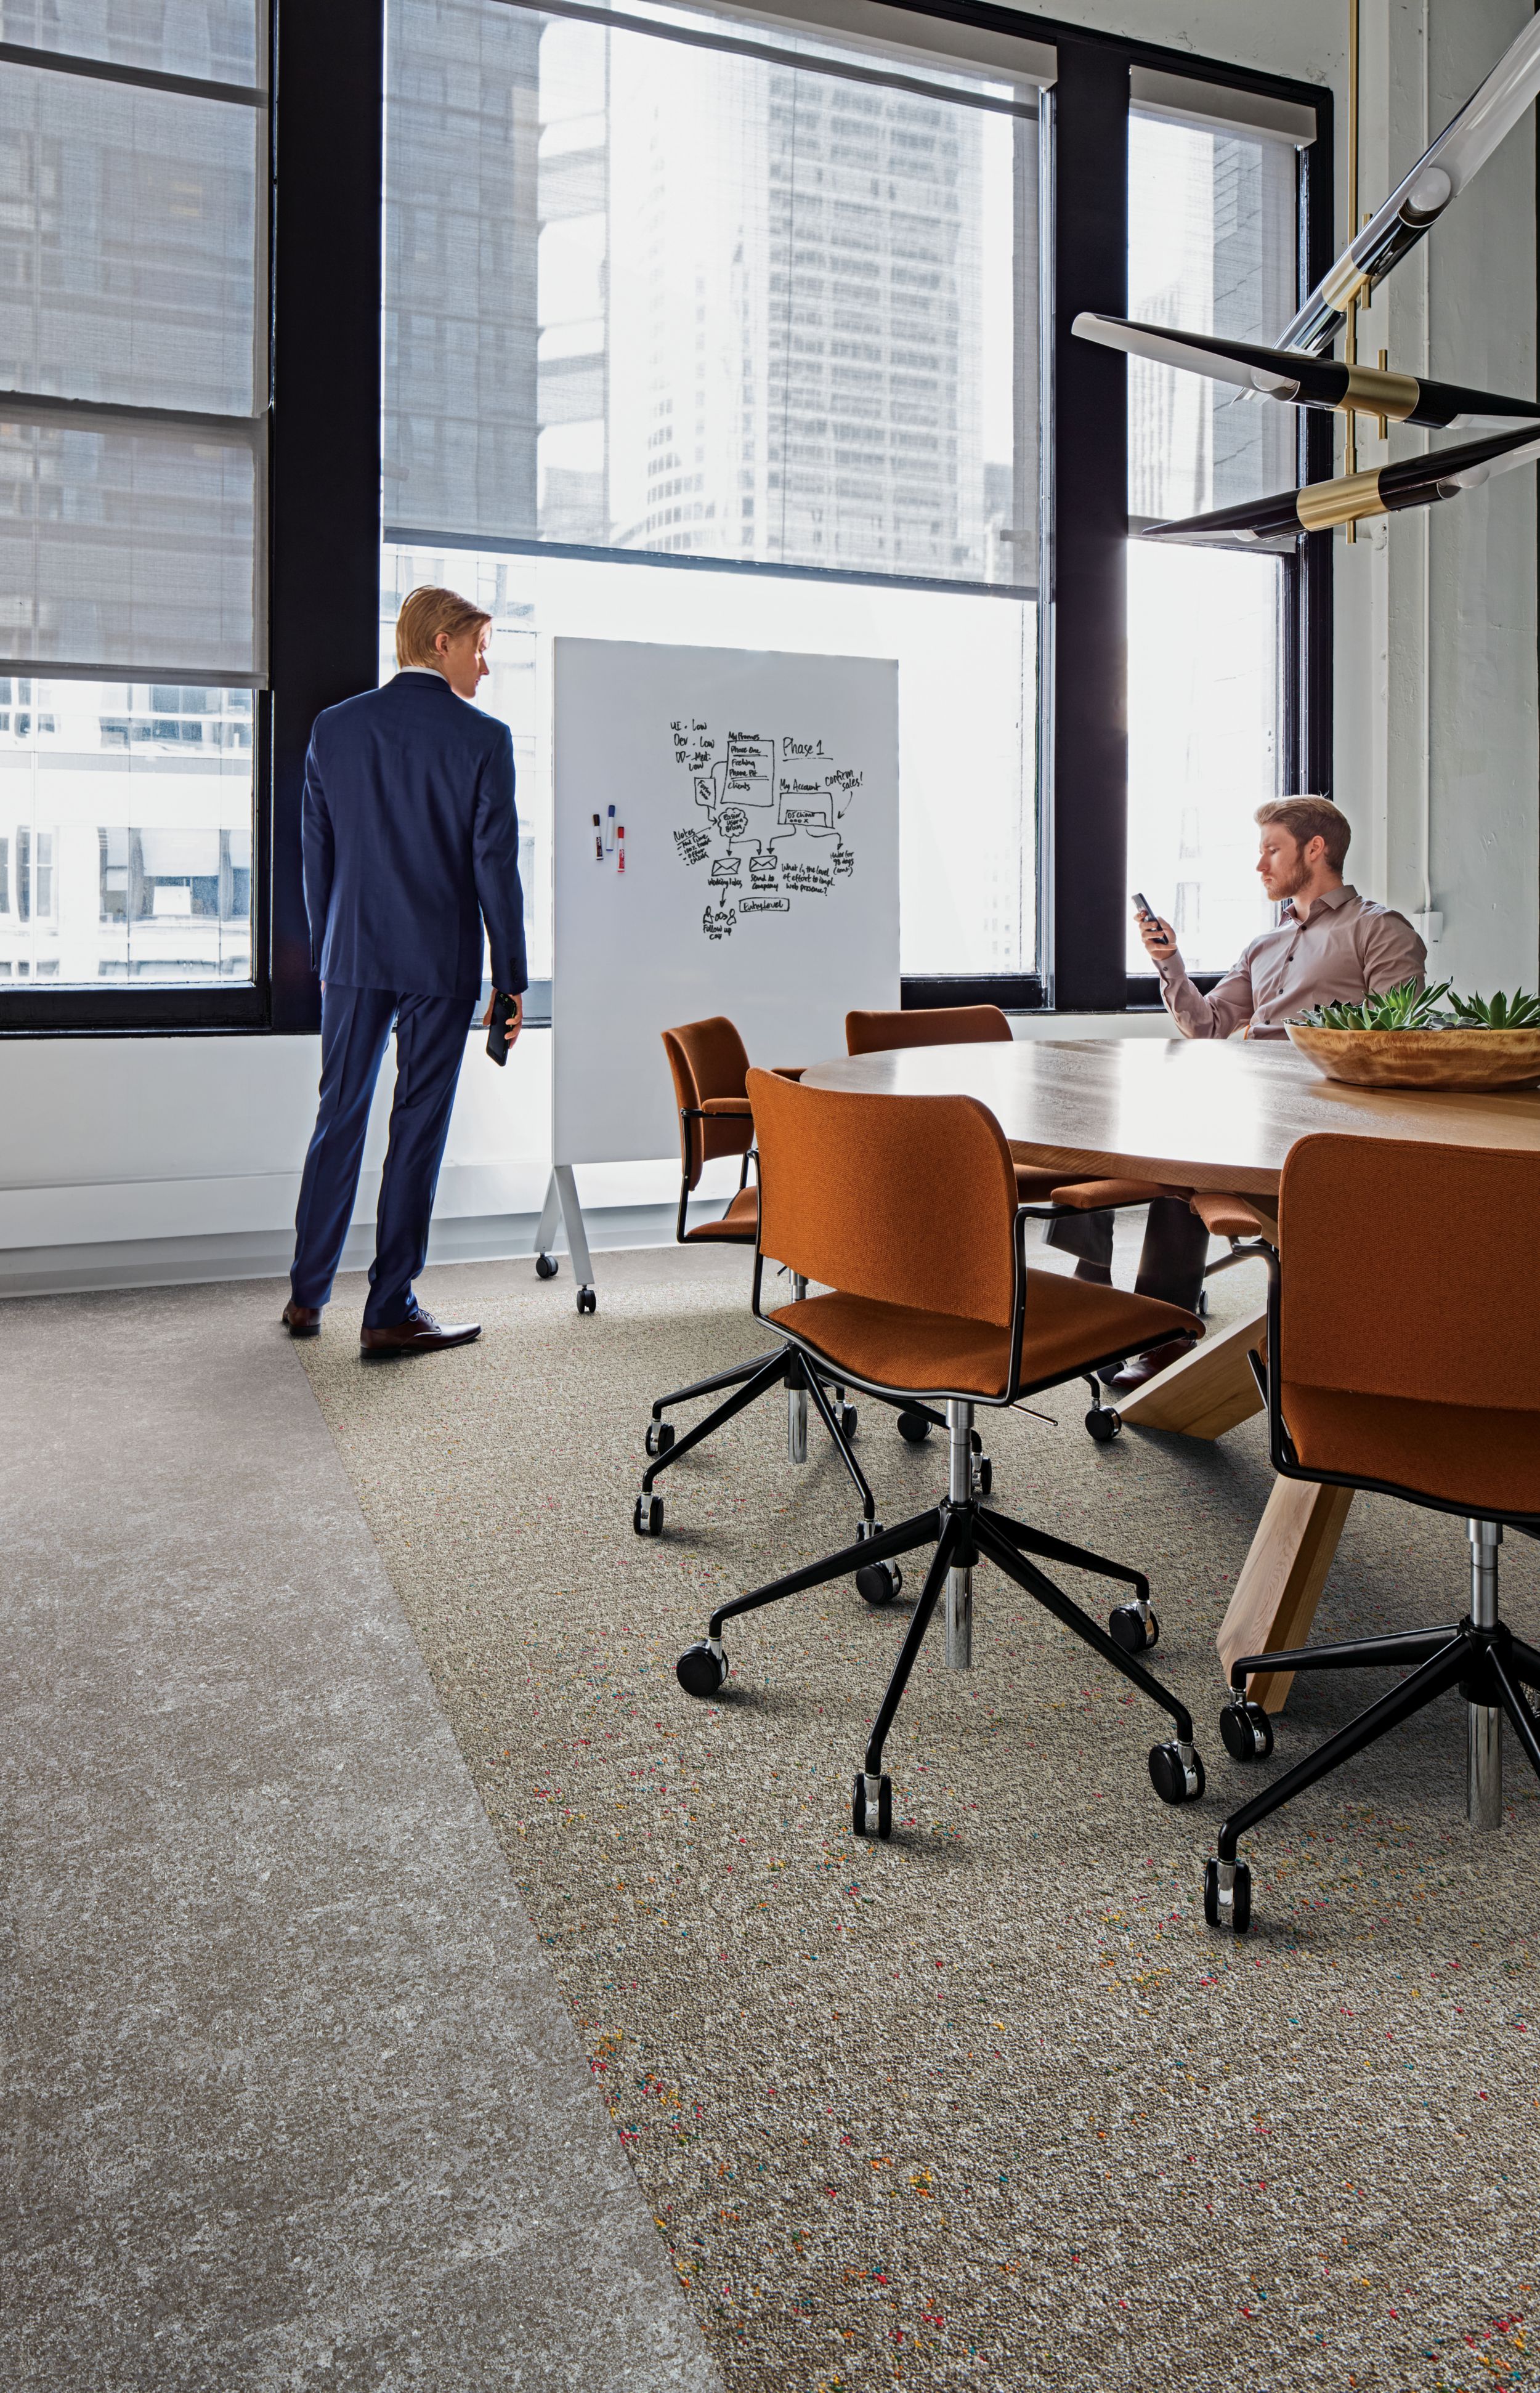 Interface Walk of Life LVT and Step Aside carpet tile in meeting space with conference table and chairs número de imagen 10